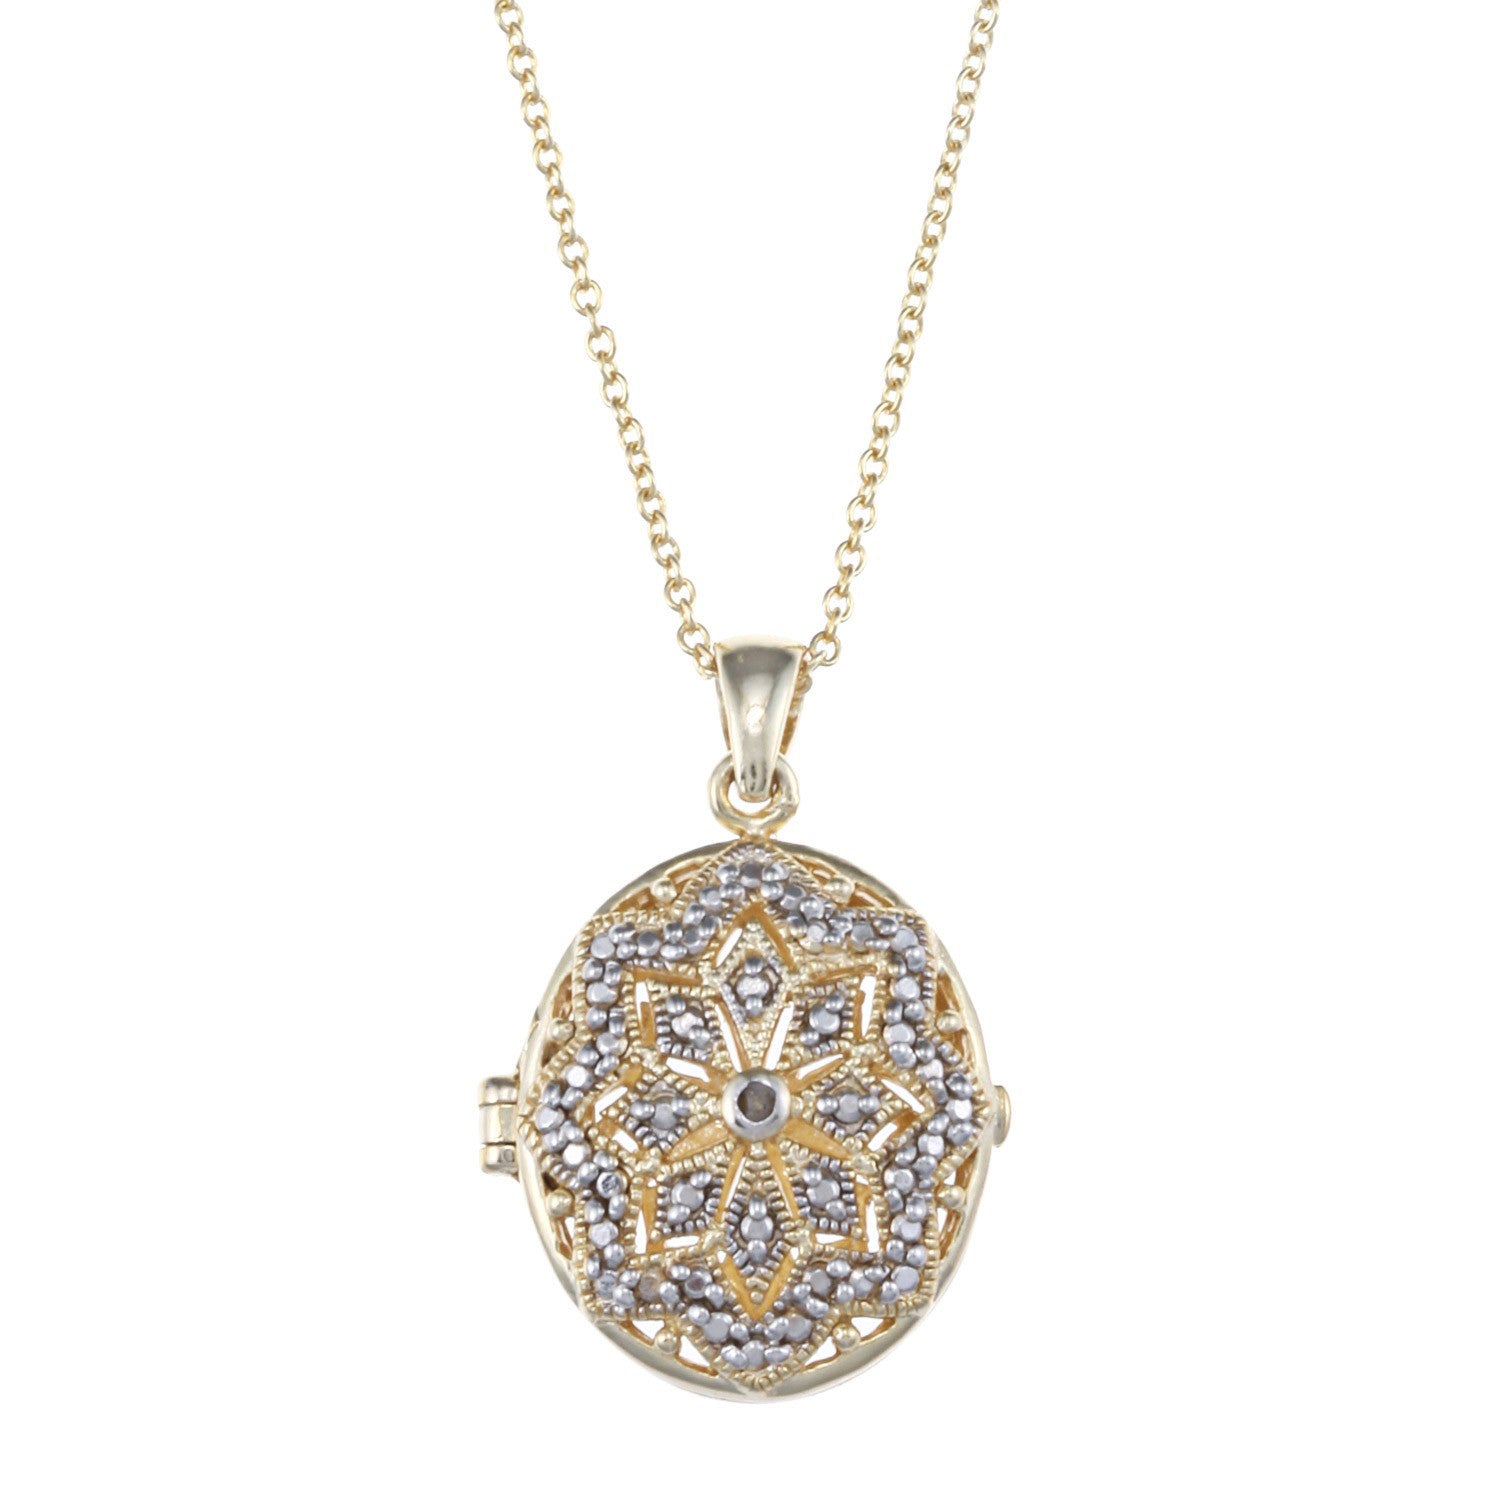 Oval Locket Necklace With Diamond Accents - Yellow